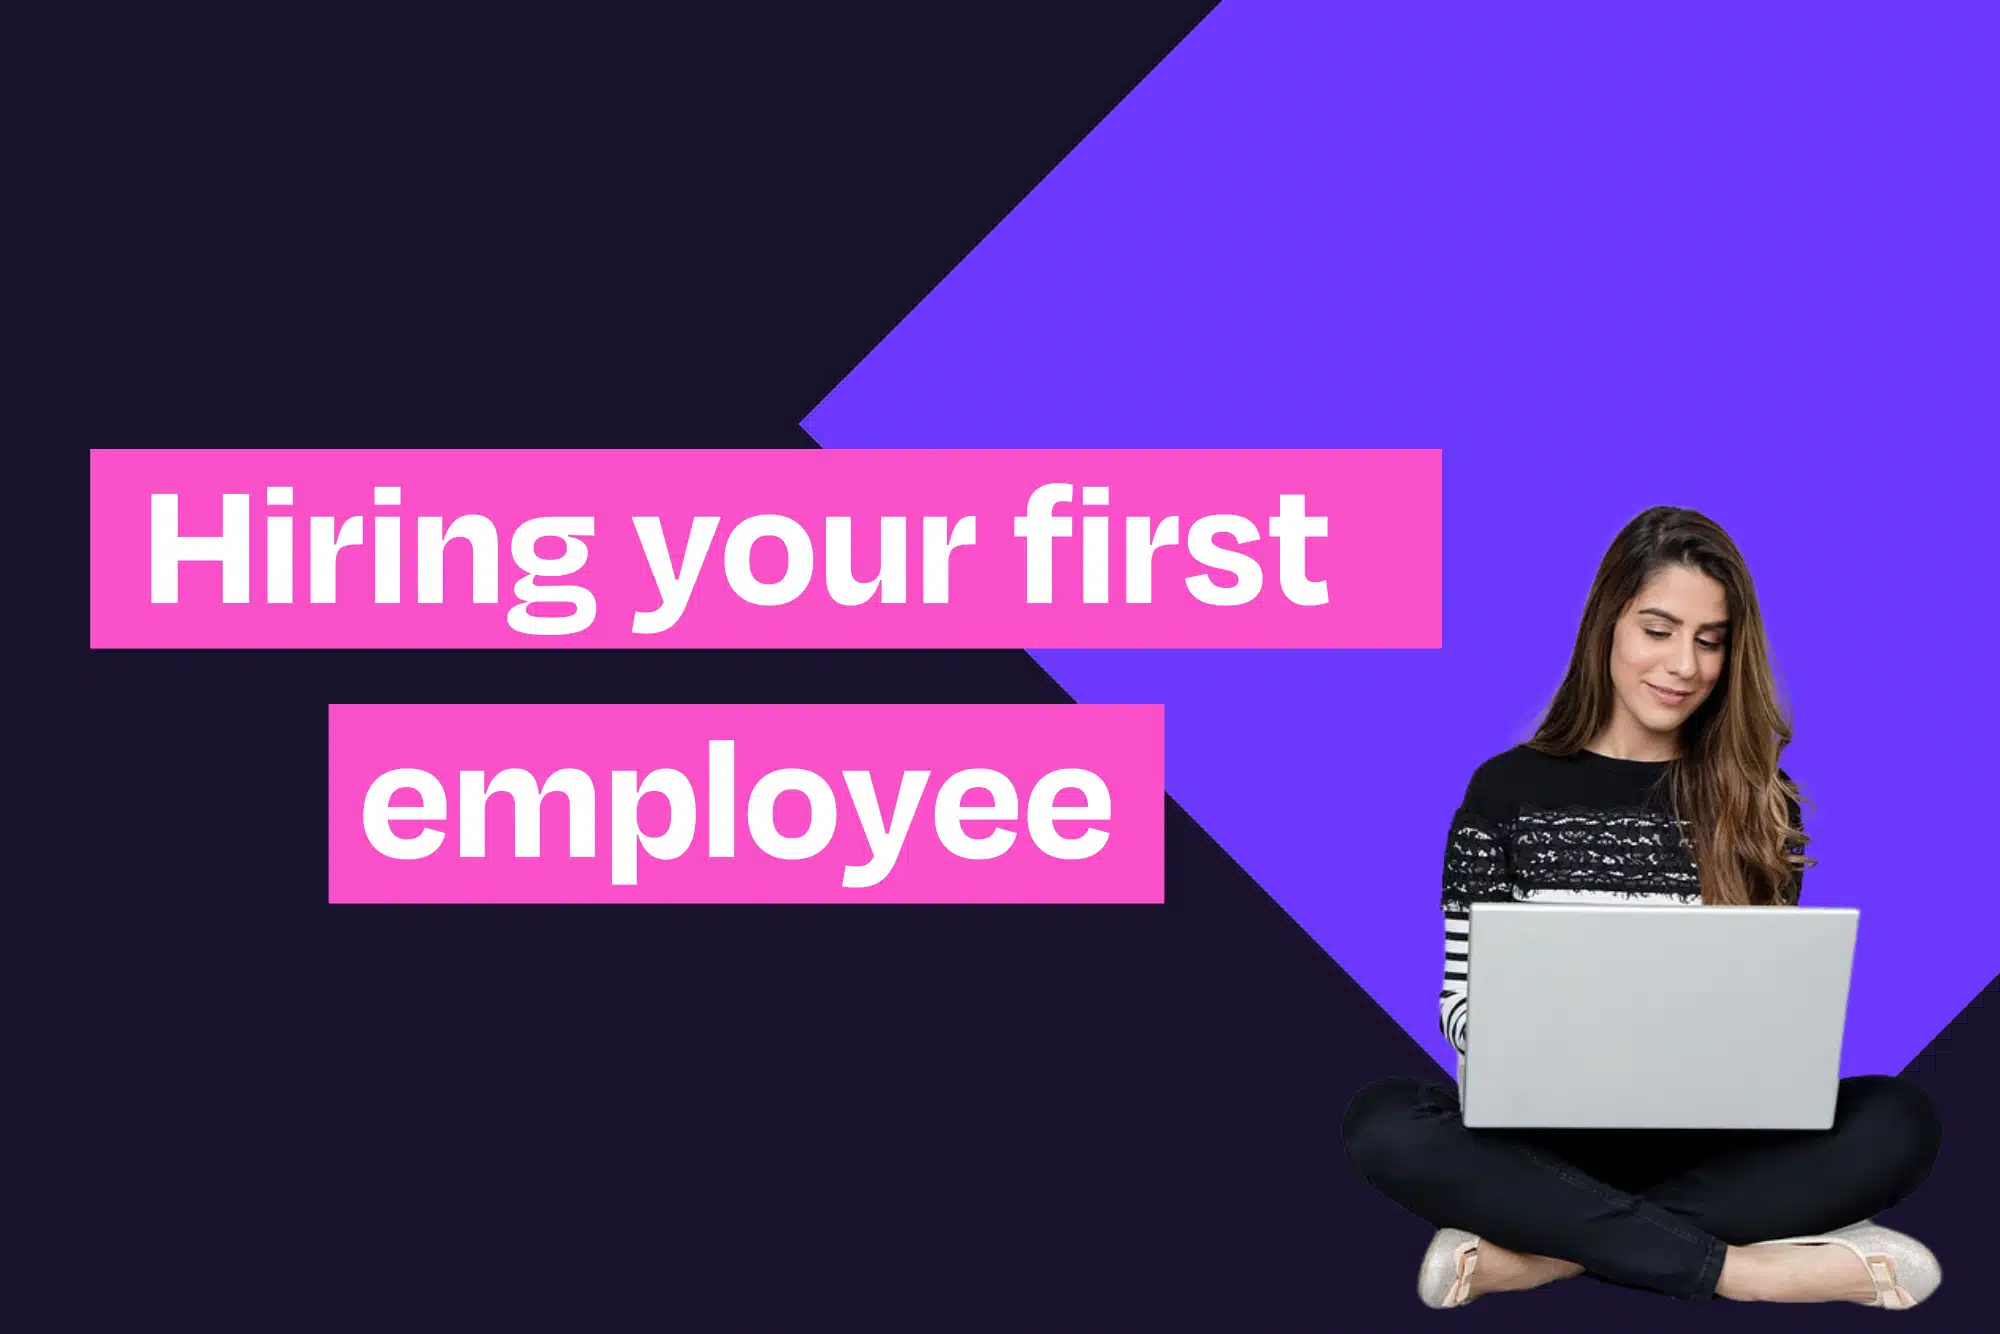 Woman sits cross legged with laptop next to blog title "Hiring your first employee".